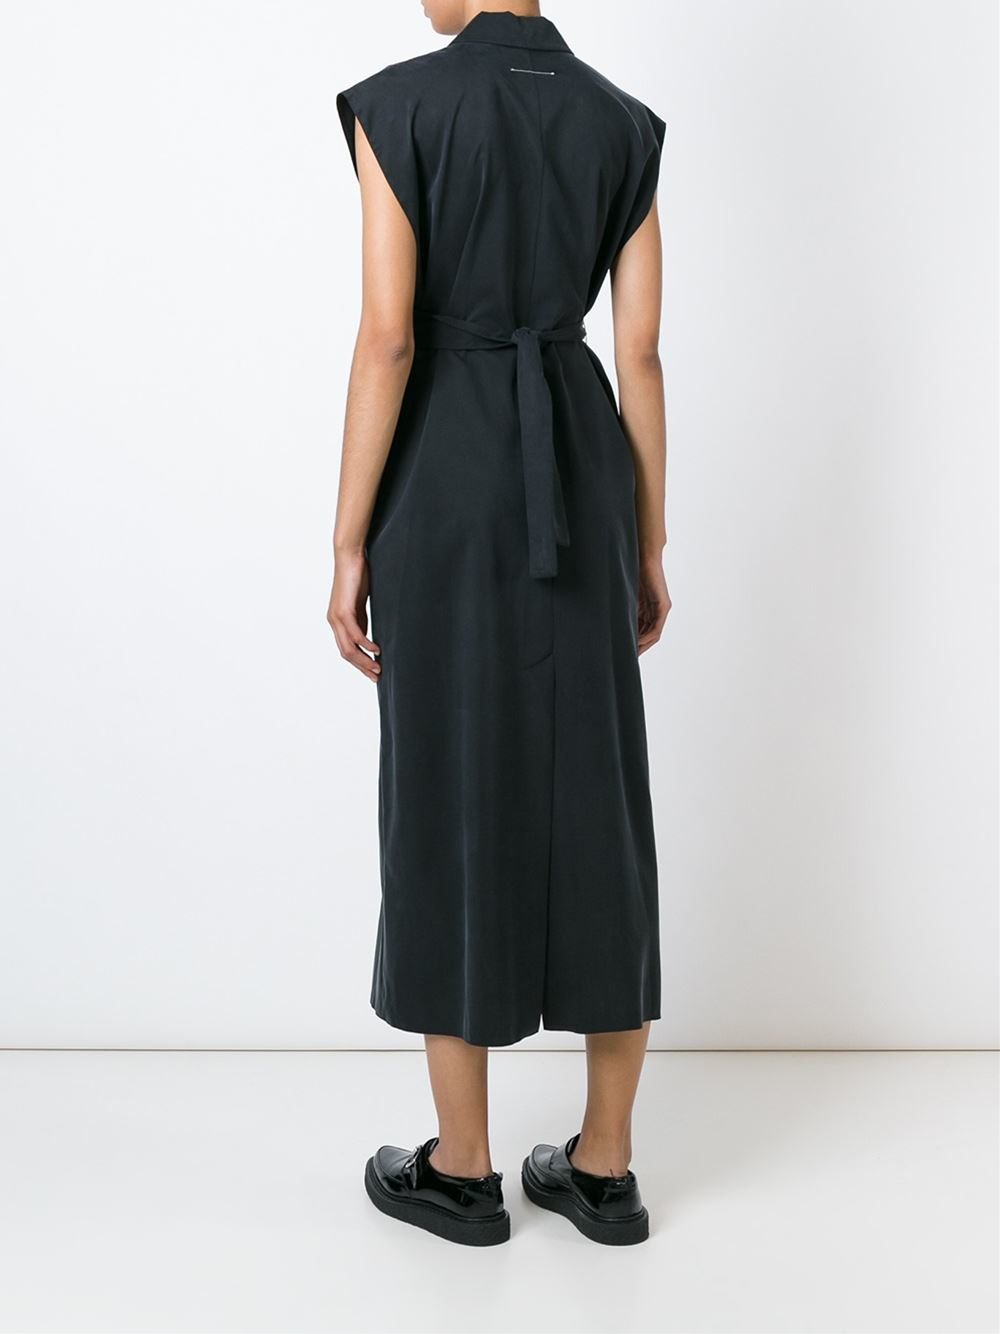 Lyst - Mm6 By Maison Martin Margiela Belted Crepe Dress in Gray